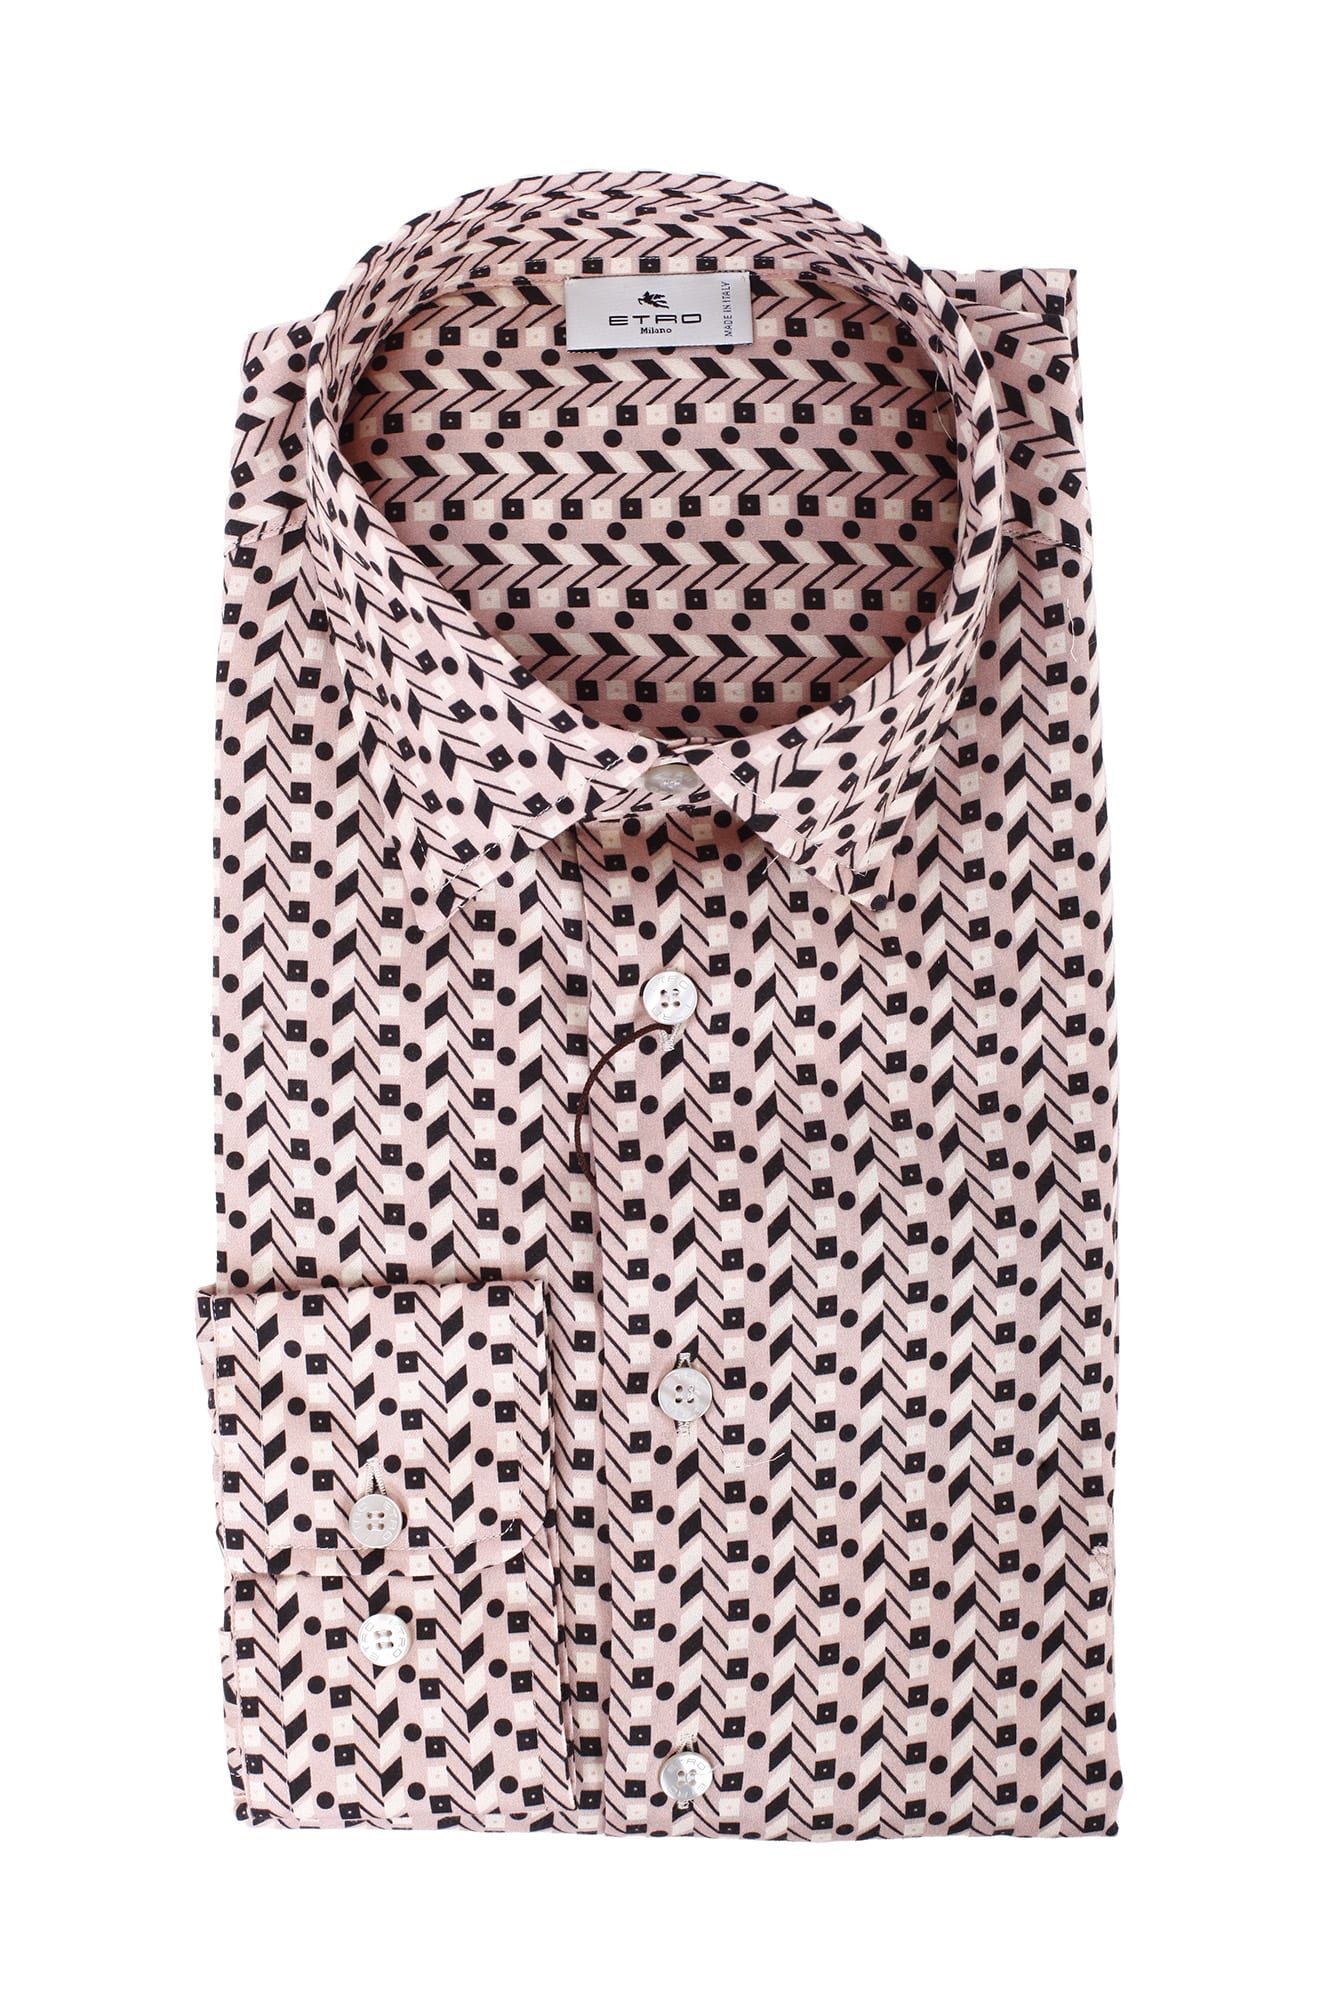 Etro Cotton Shirt Enriched By An All Over Print In Fantasia